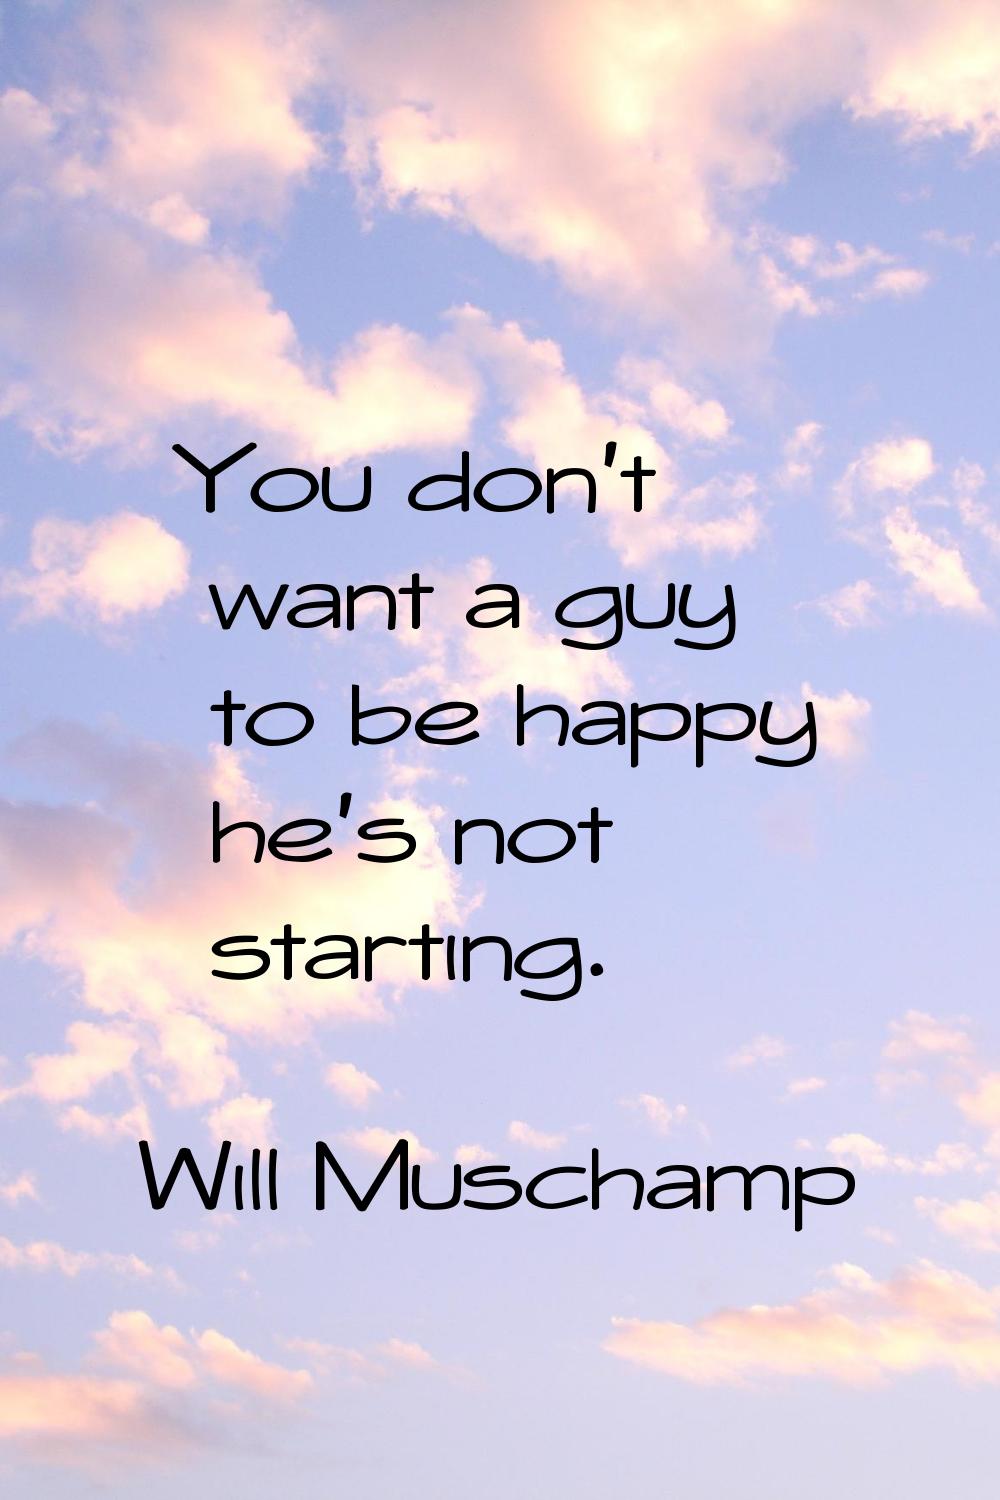 You don't want a guy to be happy he's not starting.